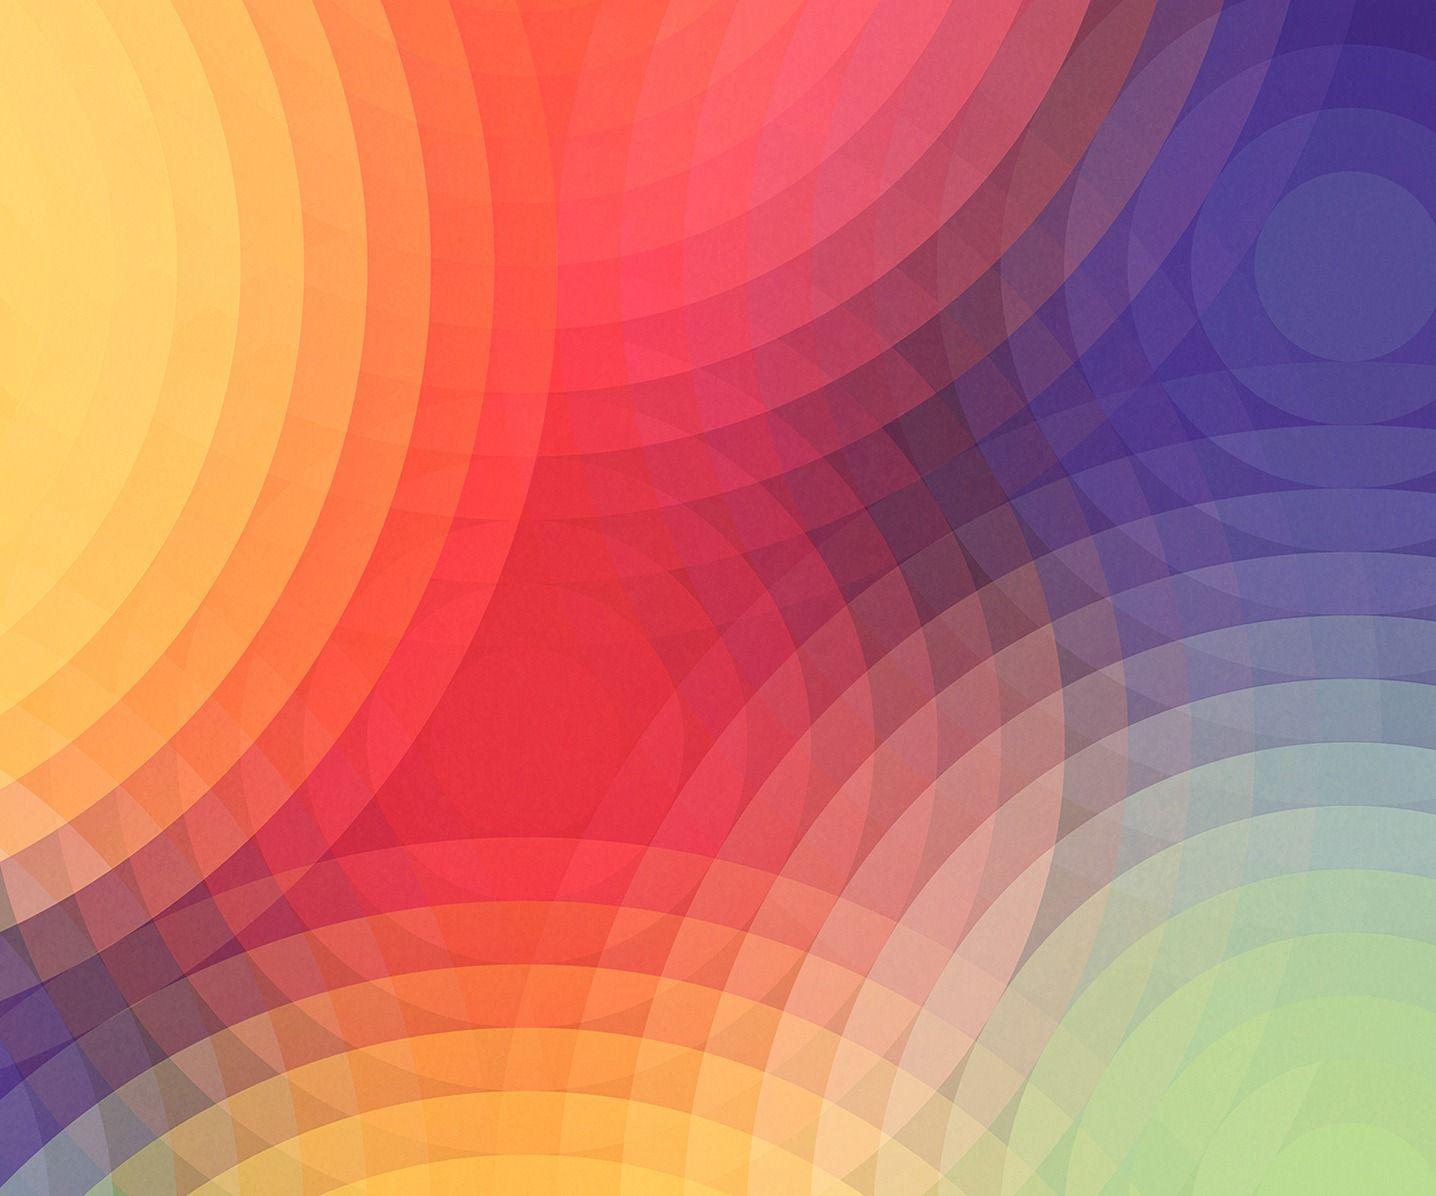 Android 4.2 Wallpaper now available for download as well as full